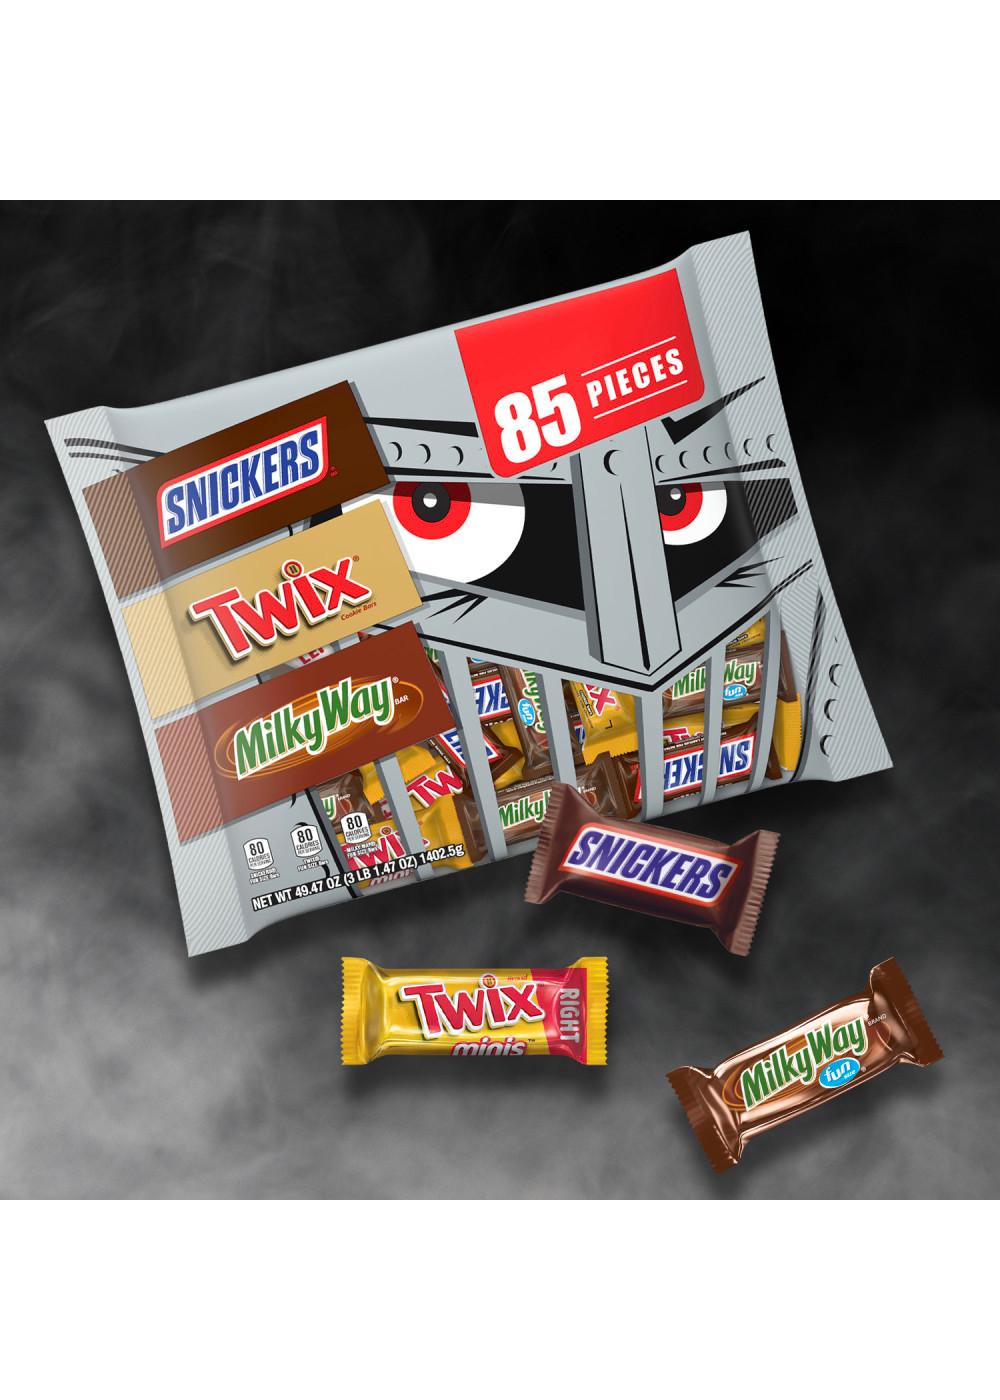 Snickers, Twix & Milky Way Assoted Fun Size Halloween Candy Bars; image 6 of 7